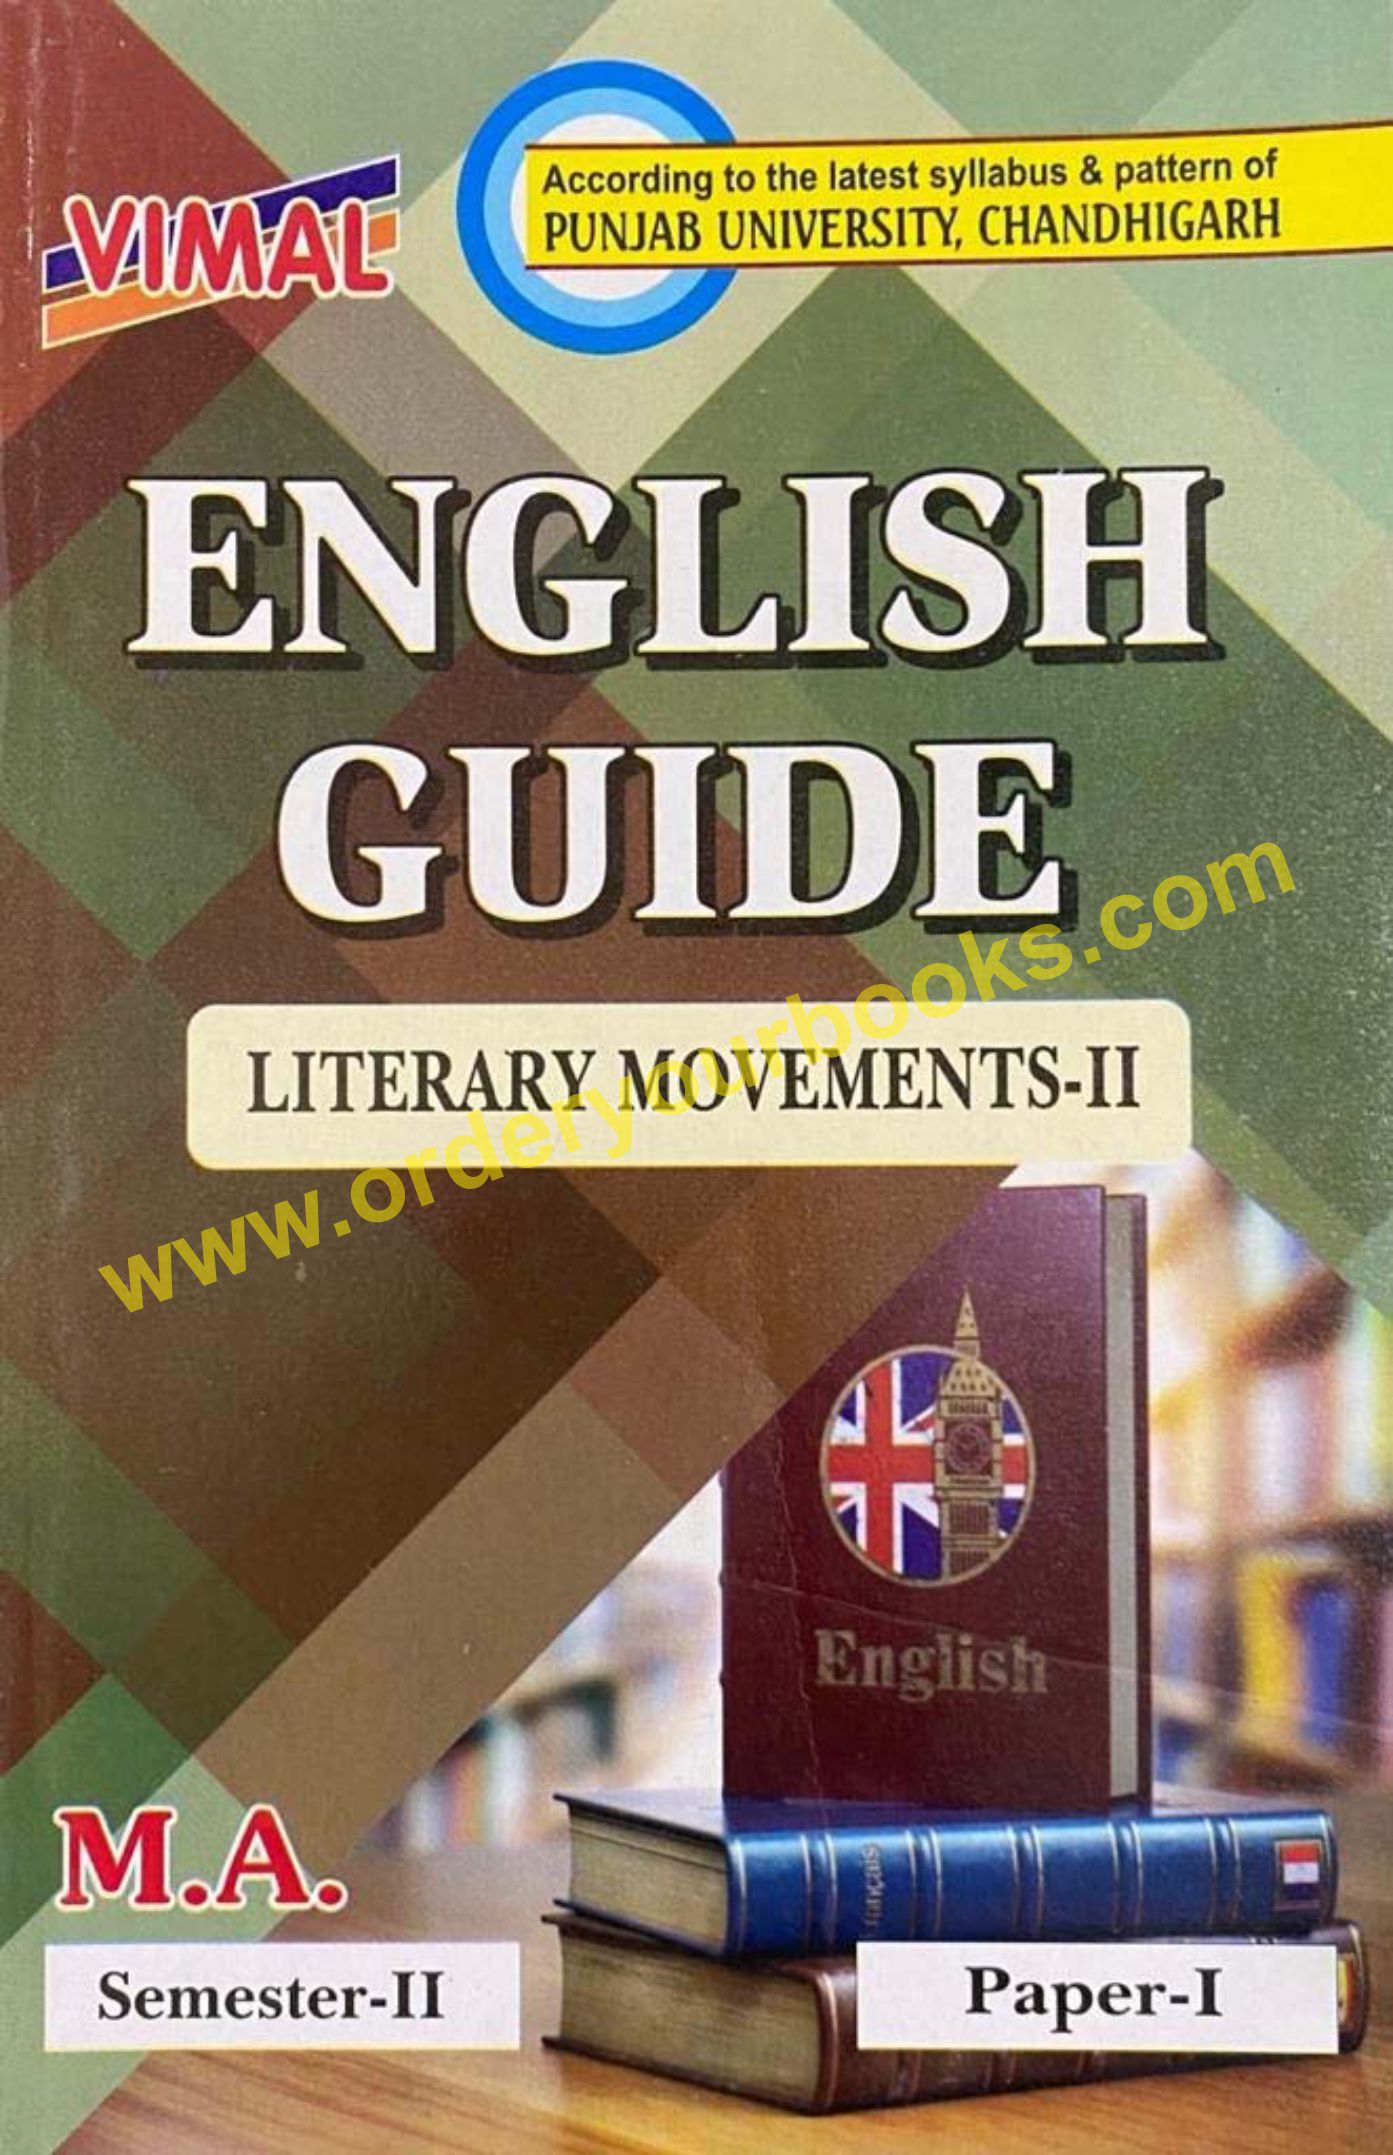 Vimal English Guide Literary Movements-2 for M.A. Sem. 2, (Paper I) Edition 2022